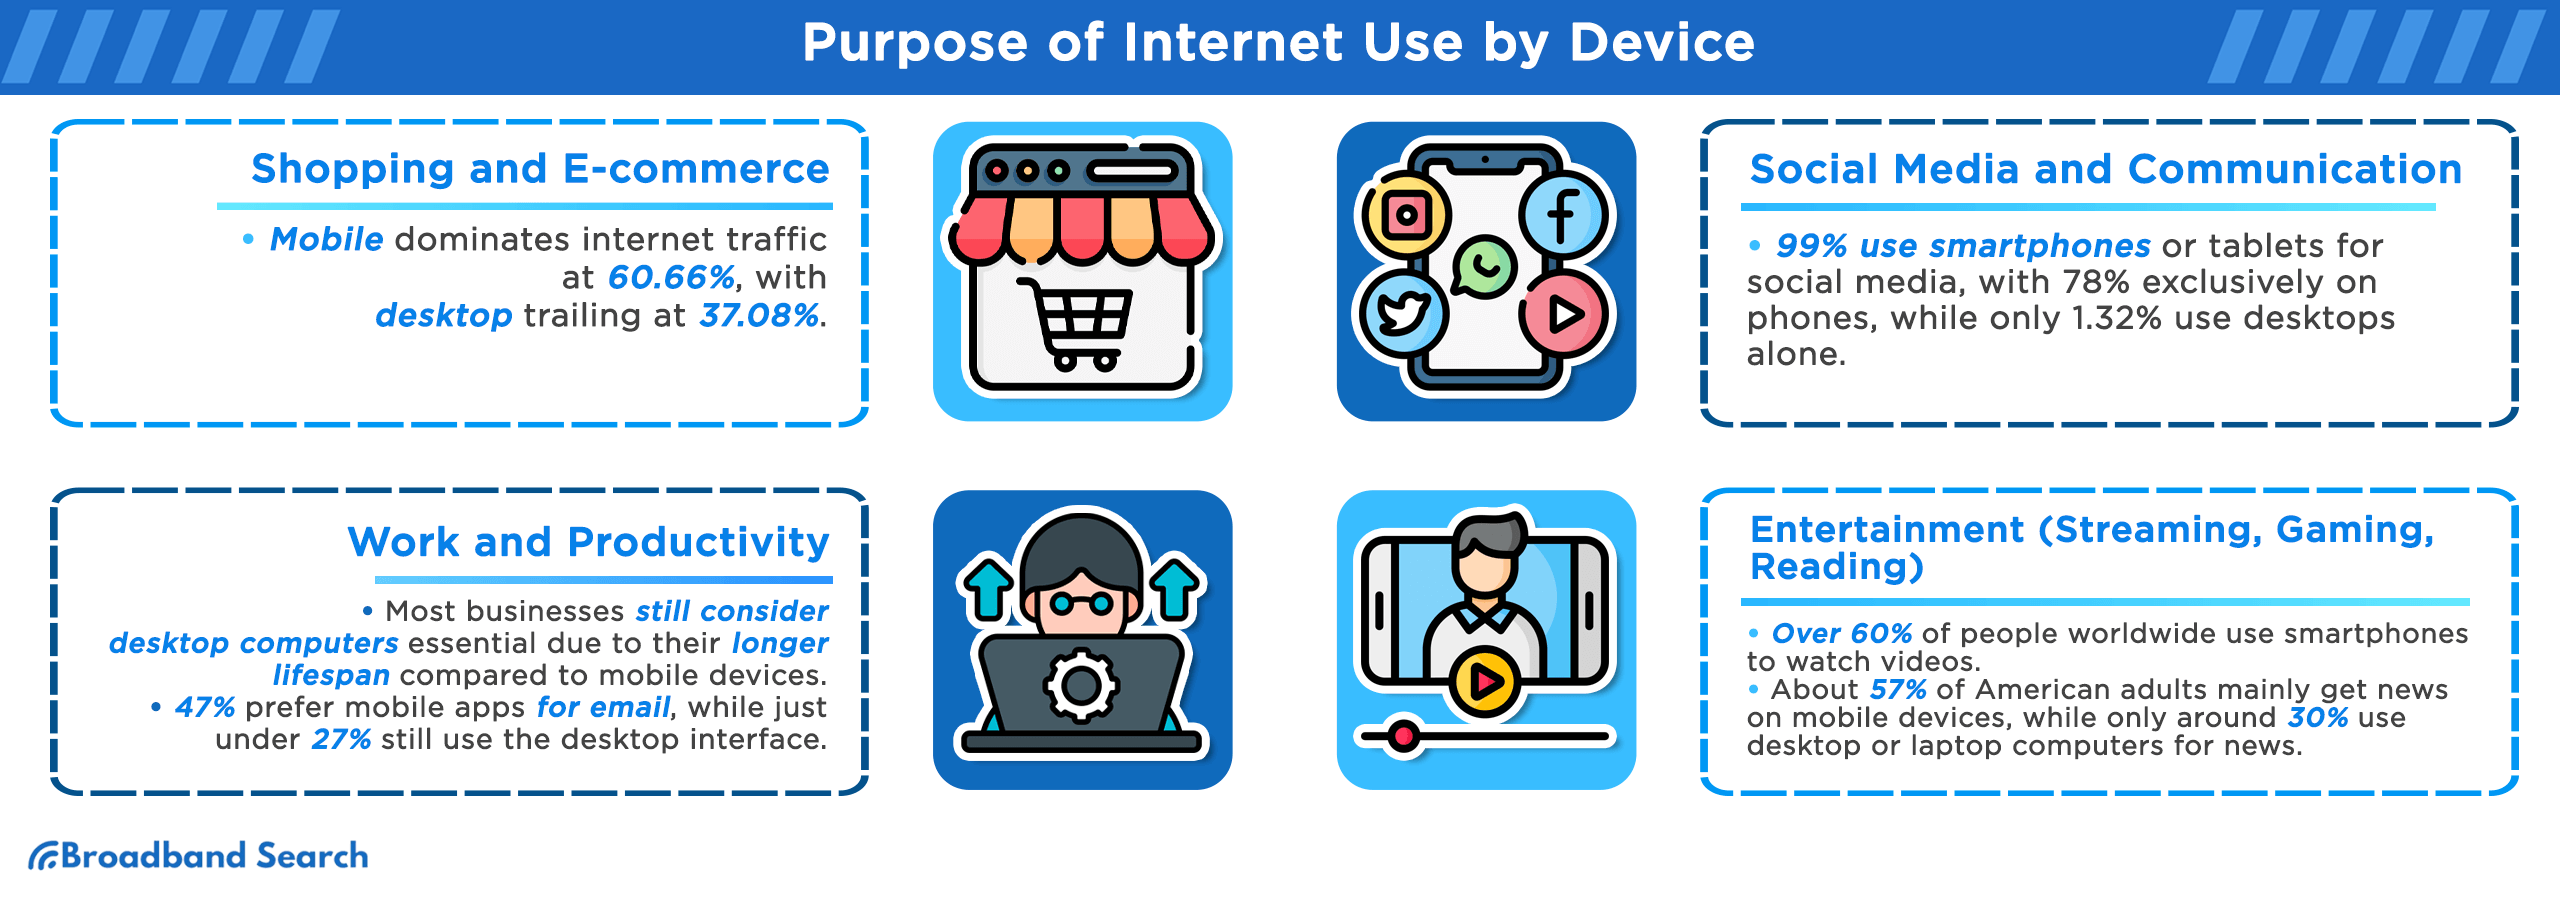 Purpose of internet use by device